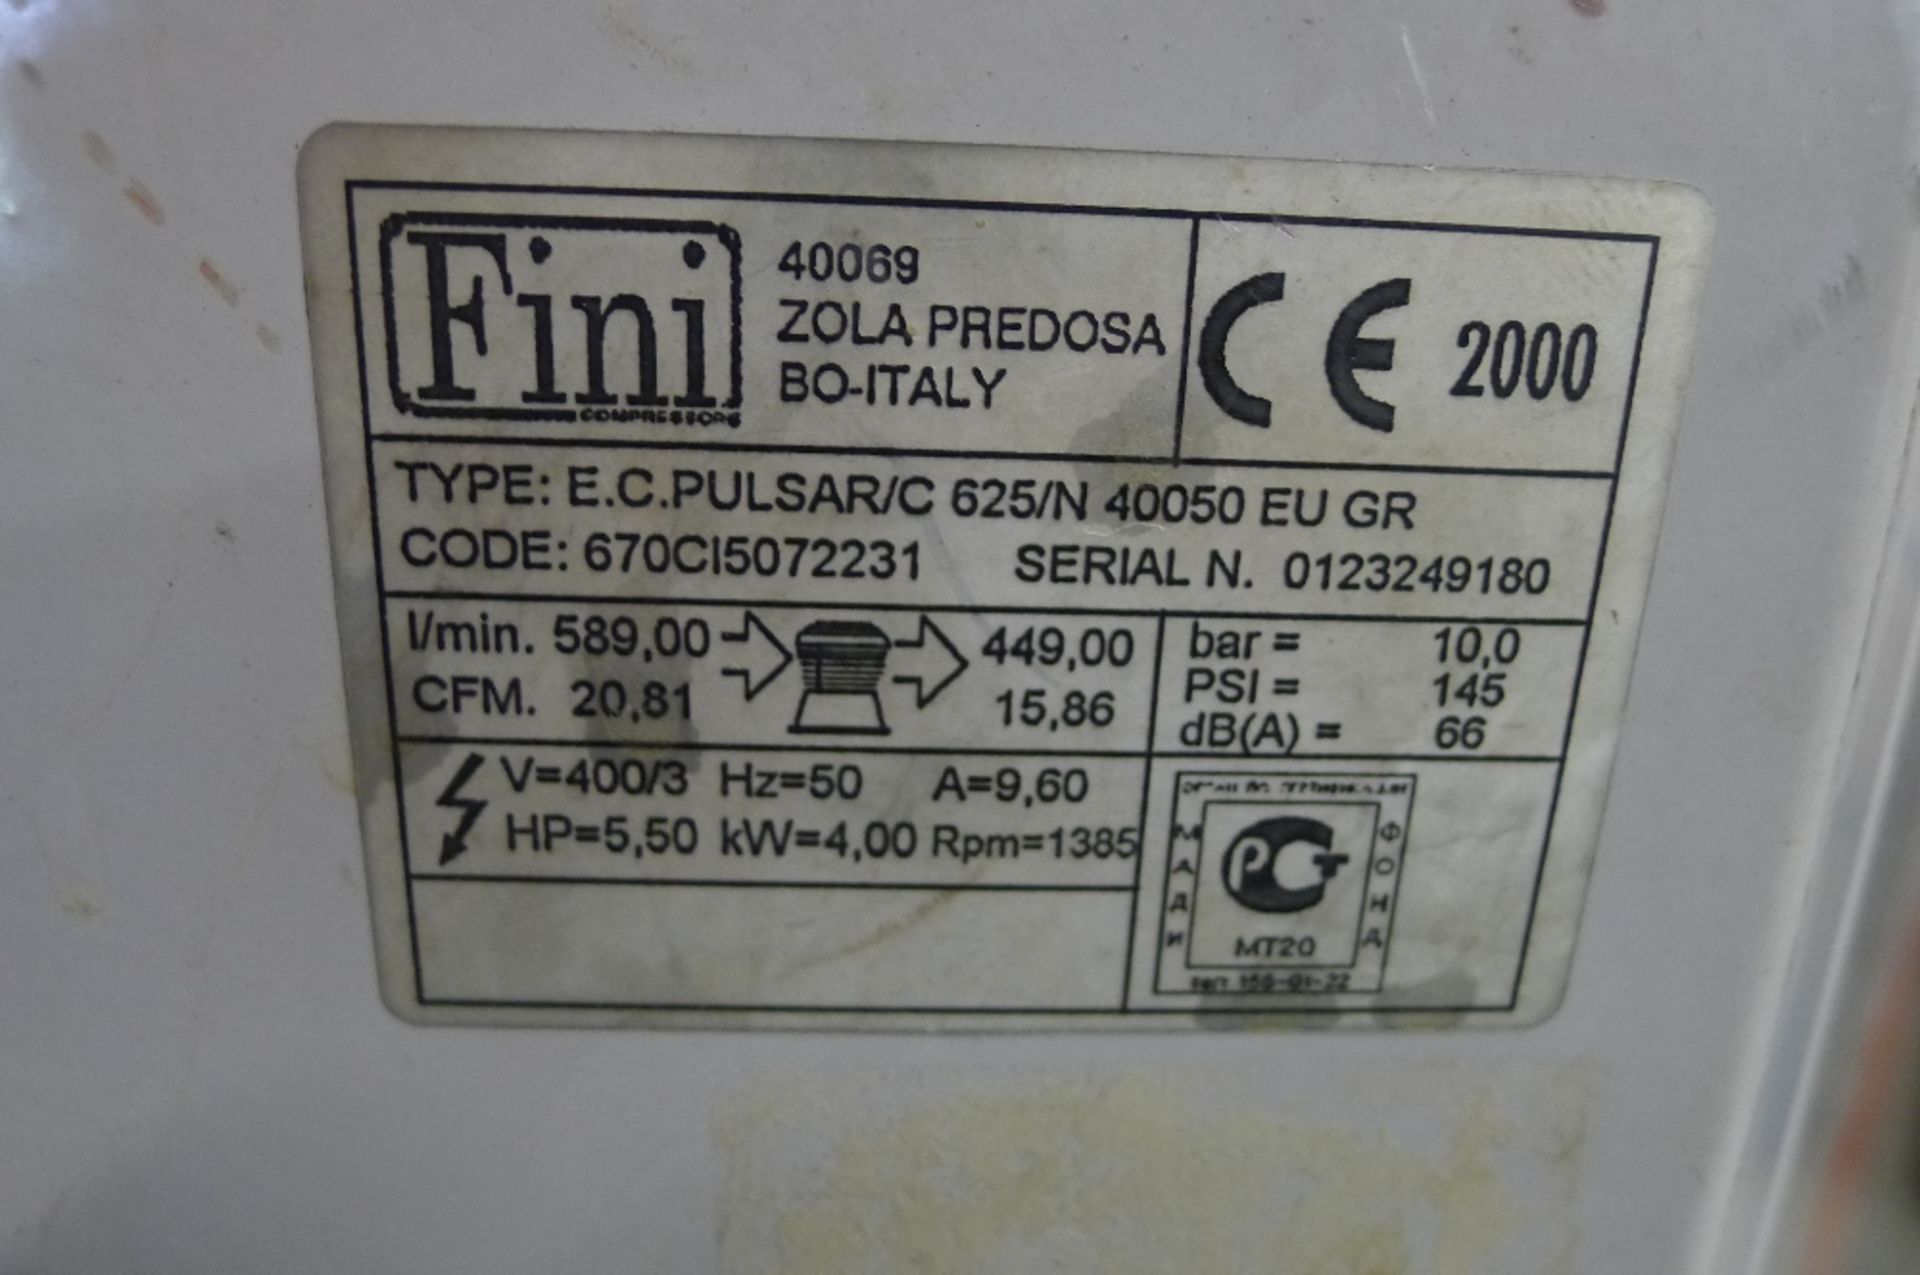 1 reciprocating silent compressor by Fini type Pulsar/C 625, 3ph, YOM 2000, 02336 hours, 10 bar / - Image 2 of 4